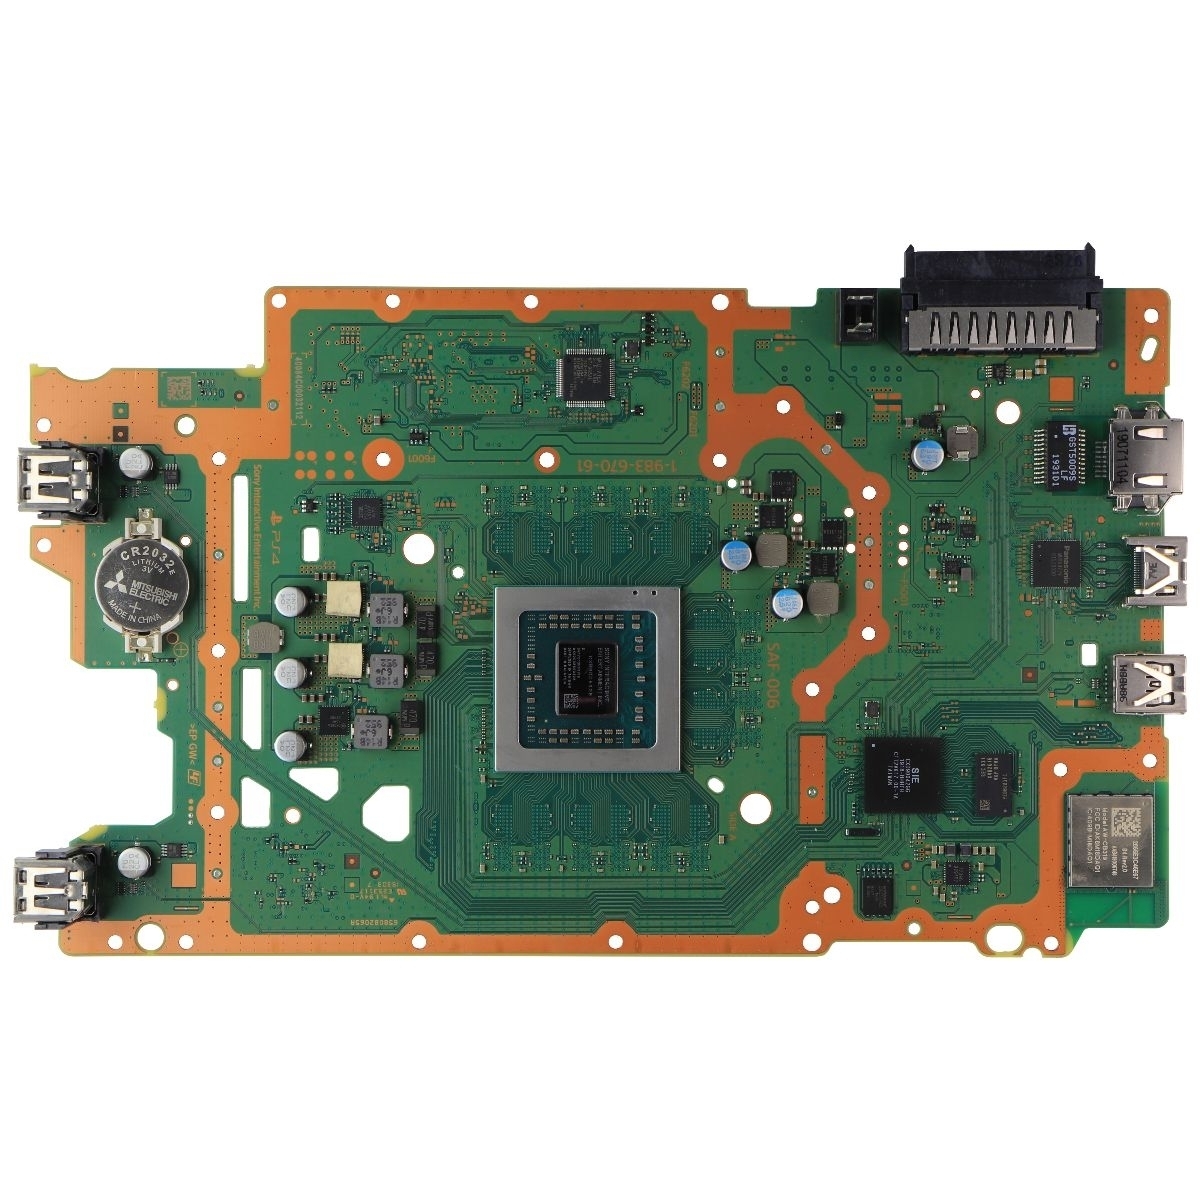 Sony Playstation 4 Slim OEM Replacement Motherboard (SAF-006) For CUH-2215B (Refurbished)